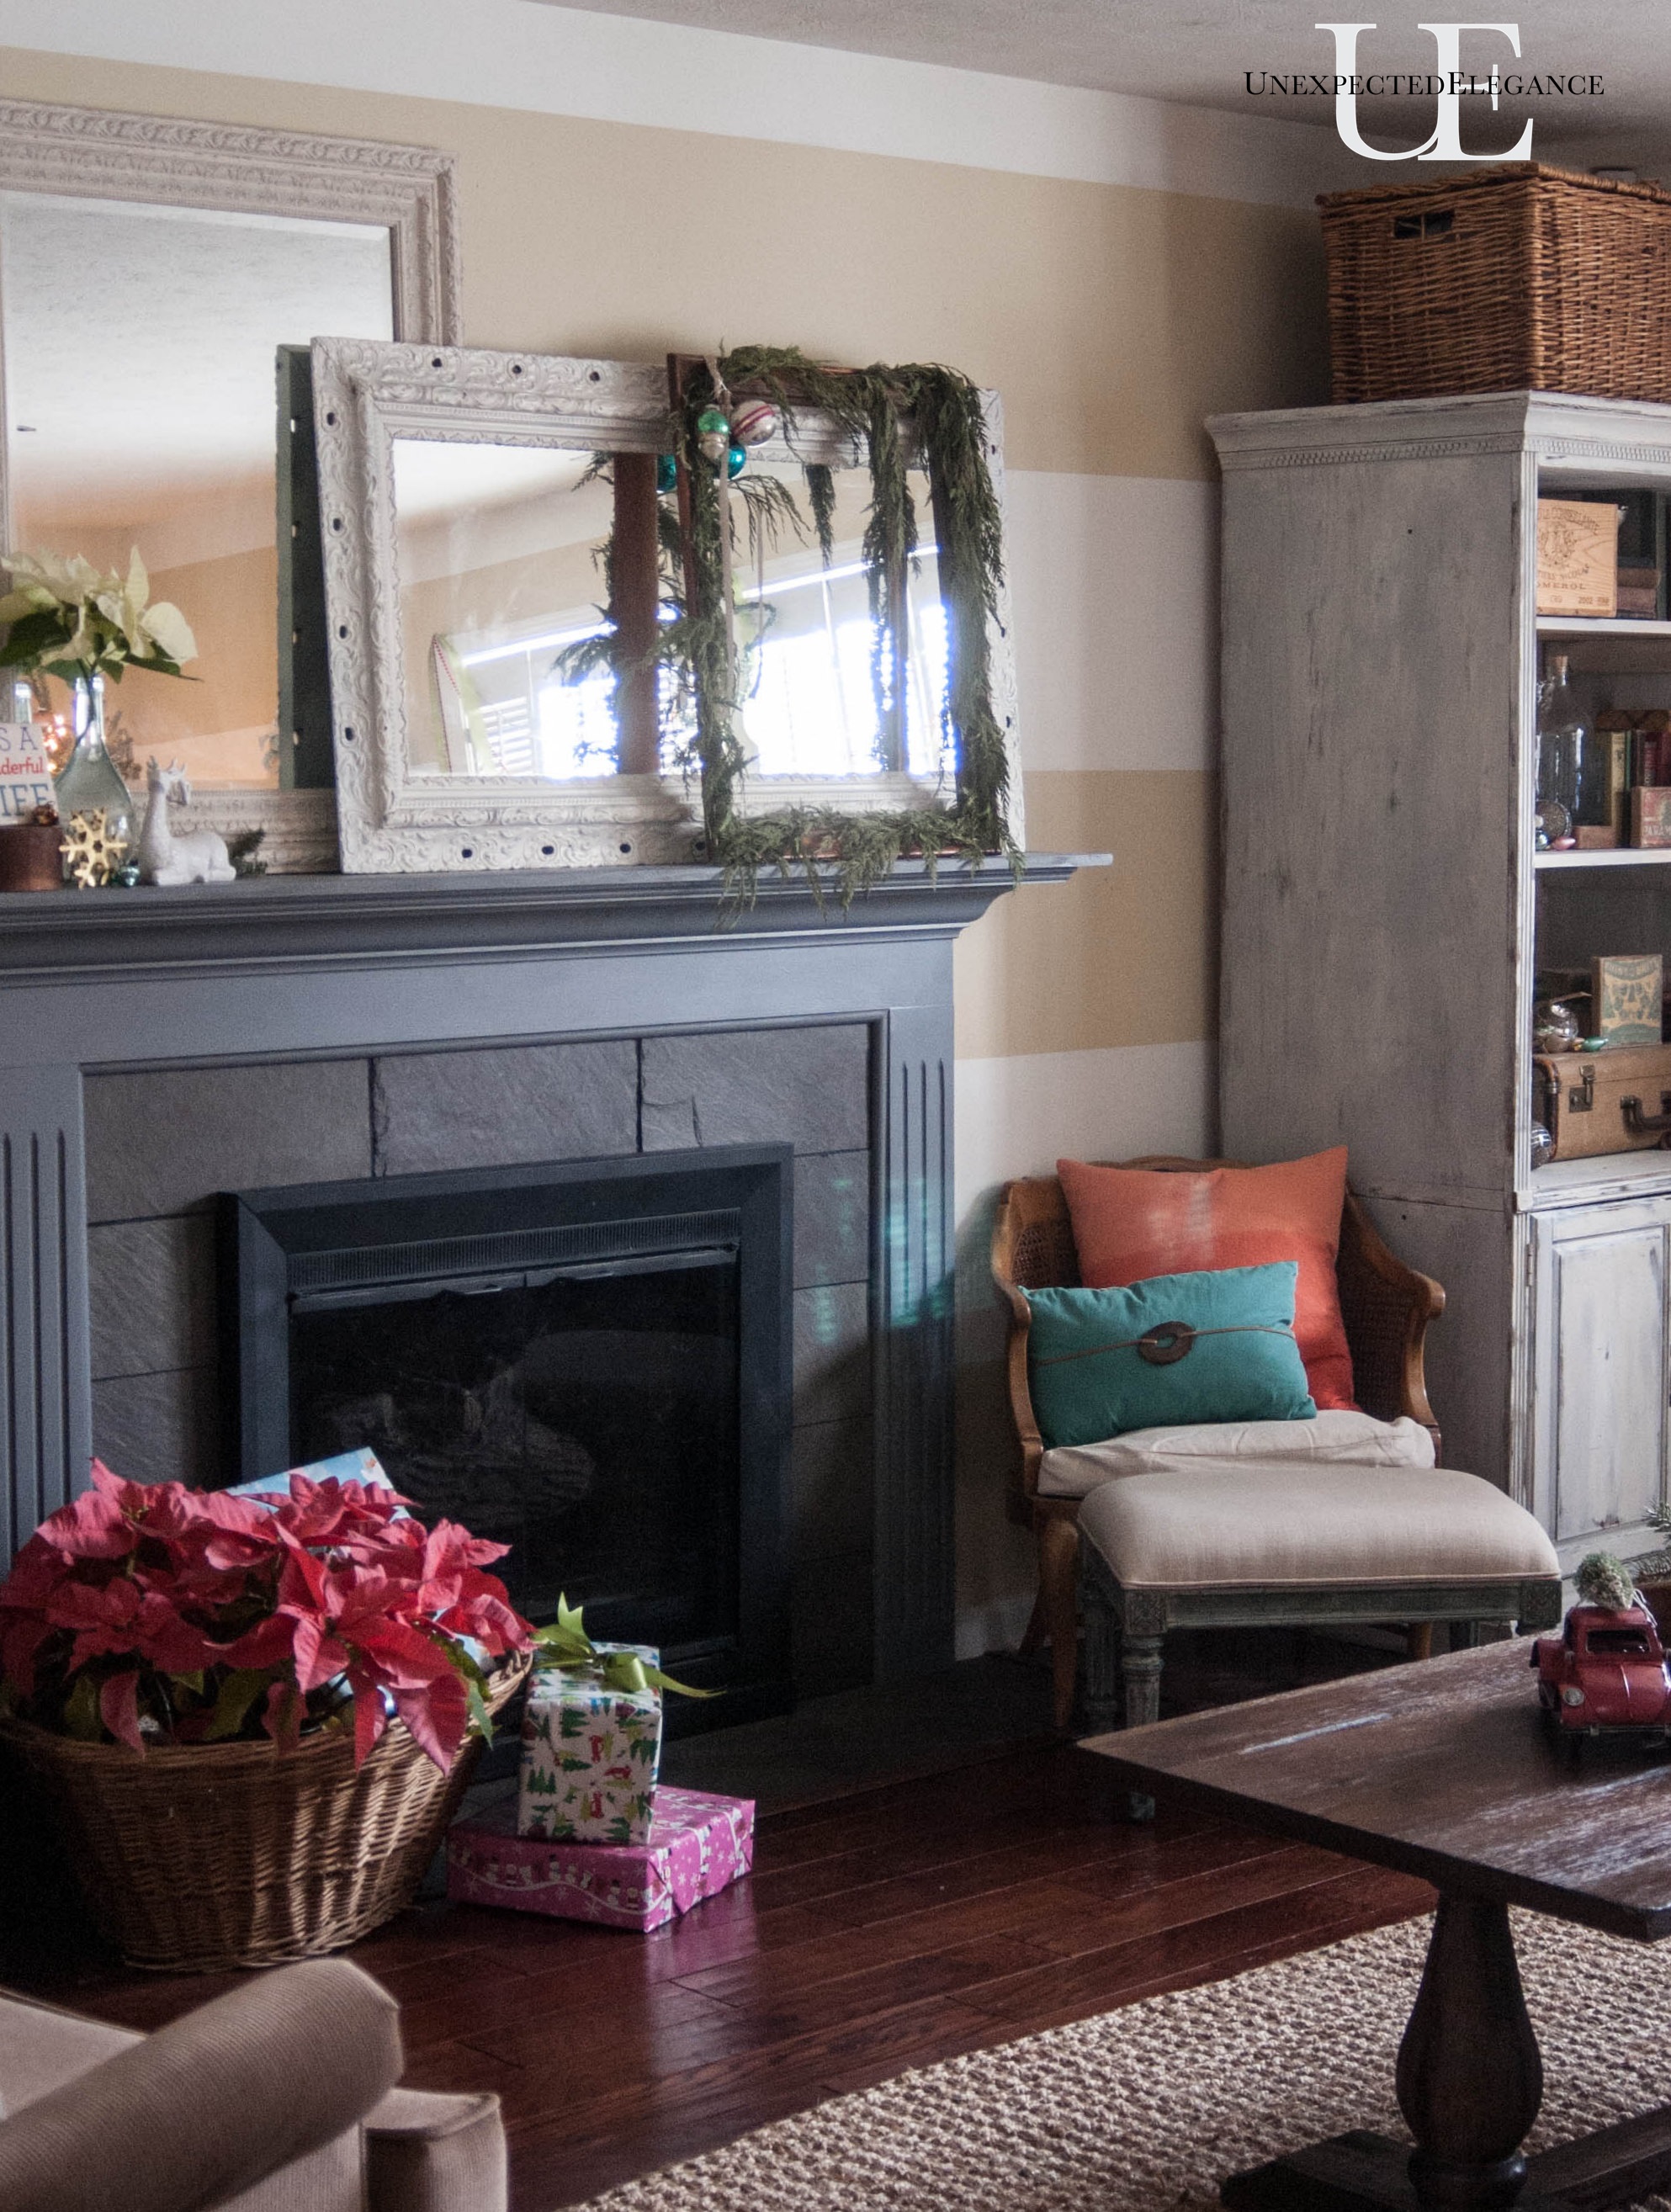 House Tour Christmas 2013 from Unexpected Elegance